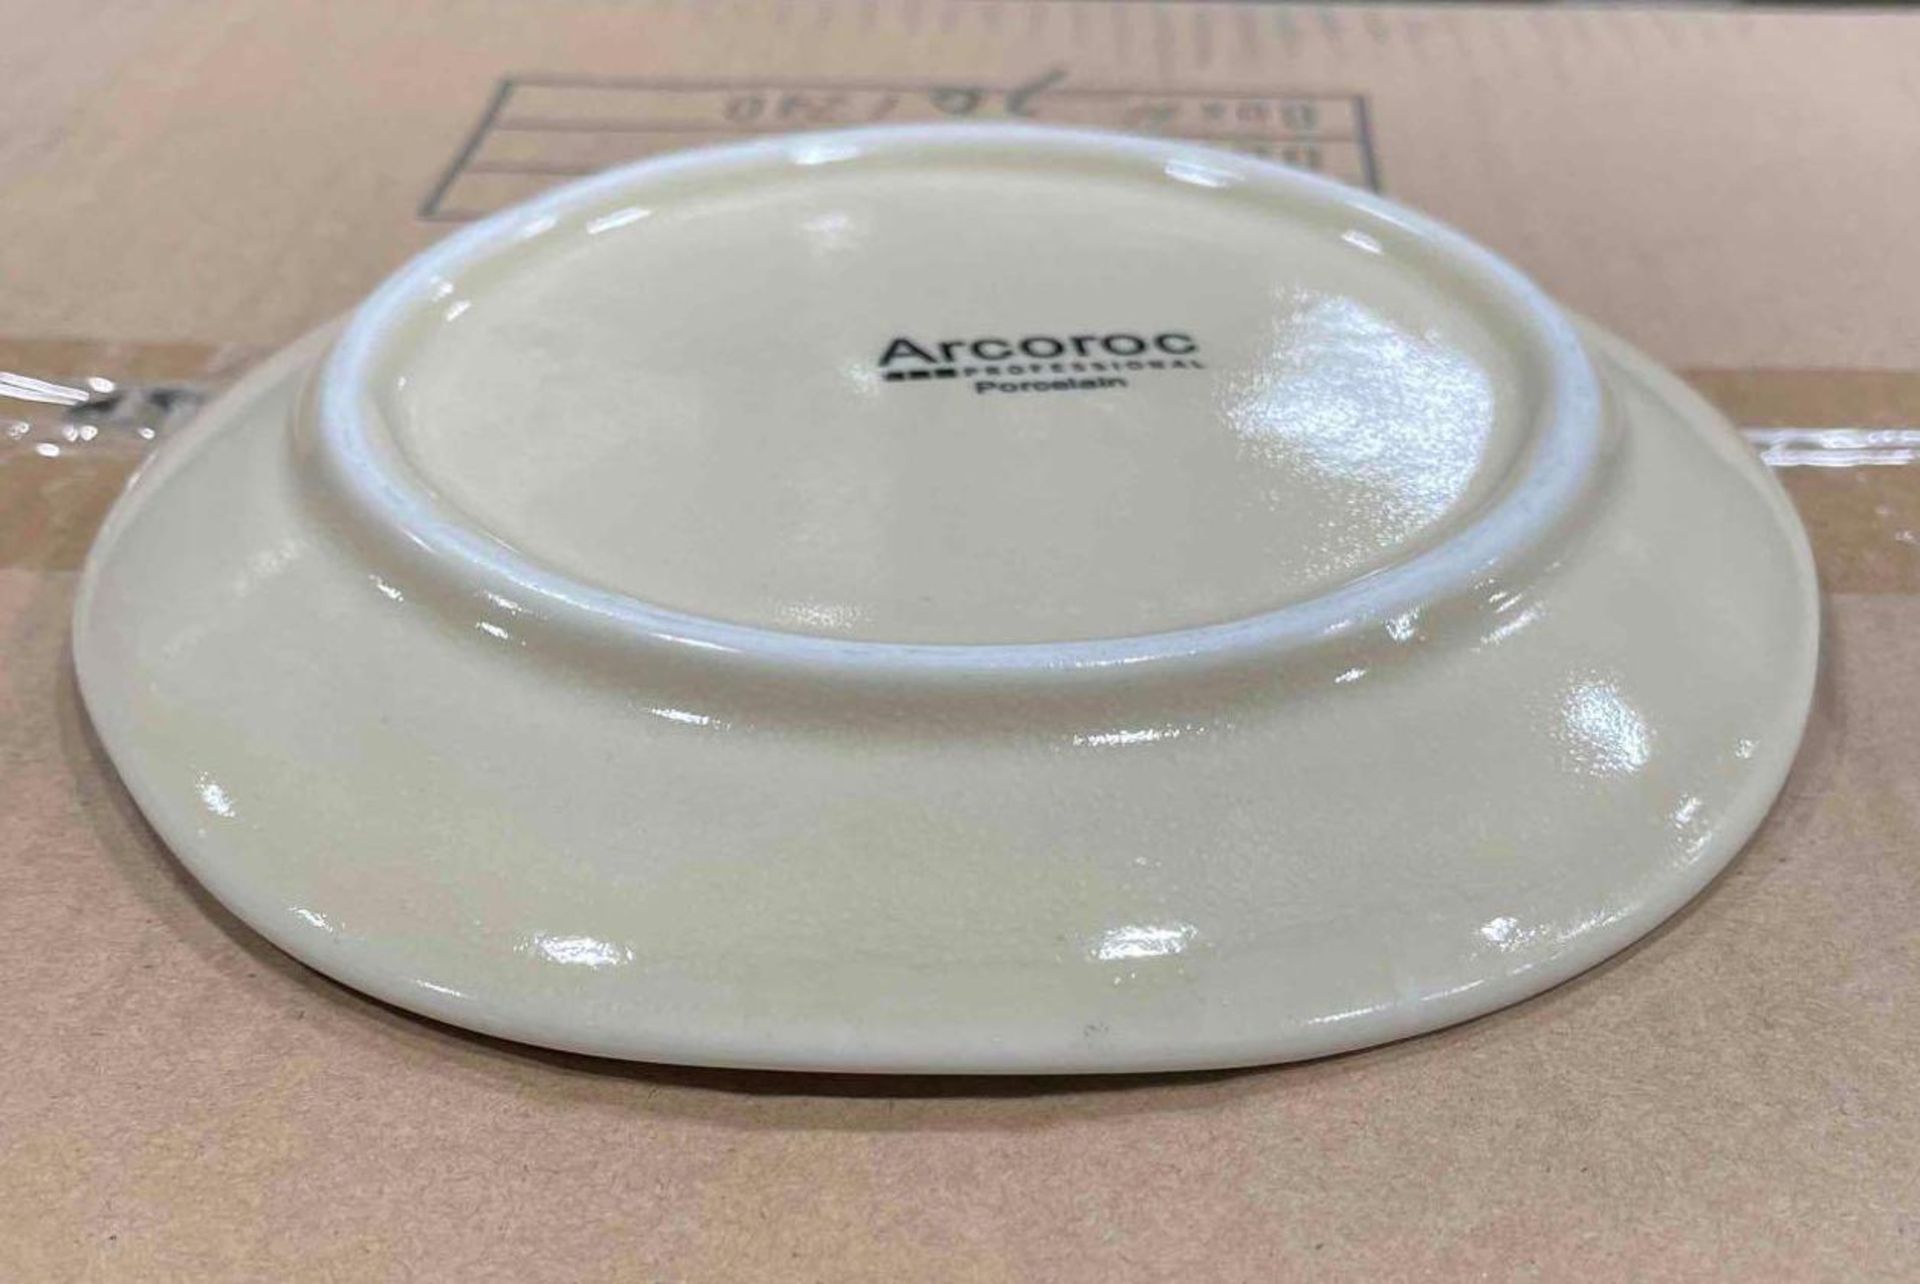 3 CASES OF CANYON RIDGE SAND 6 1/2" PLATE - 36/CASE, ARCOROC - NEW - Image 3 of 4